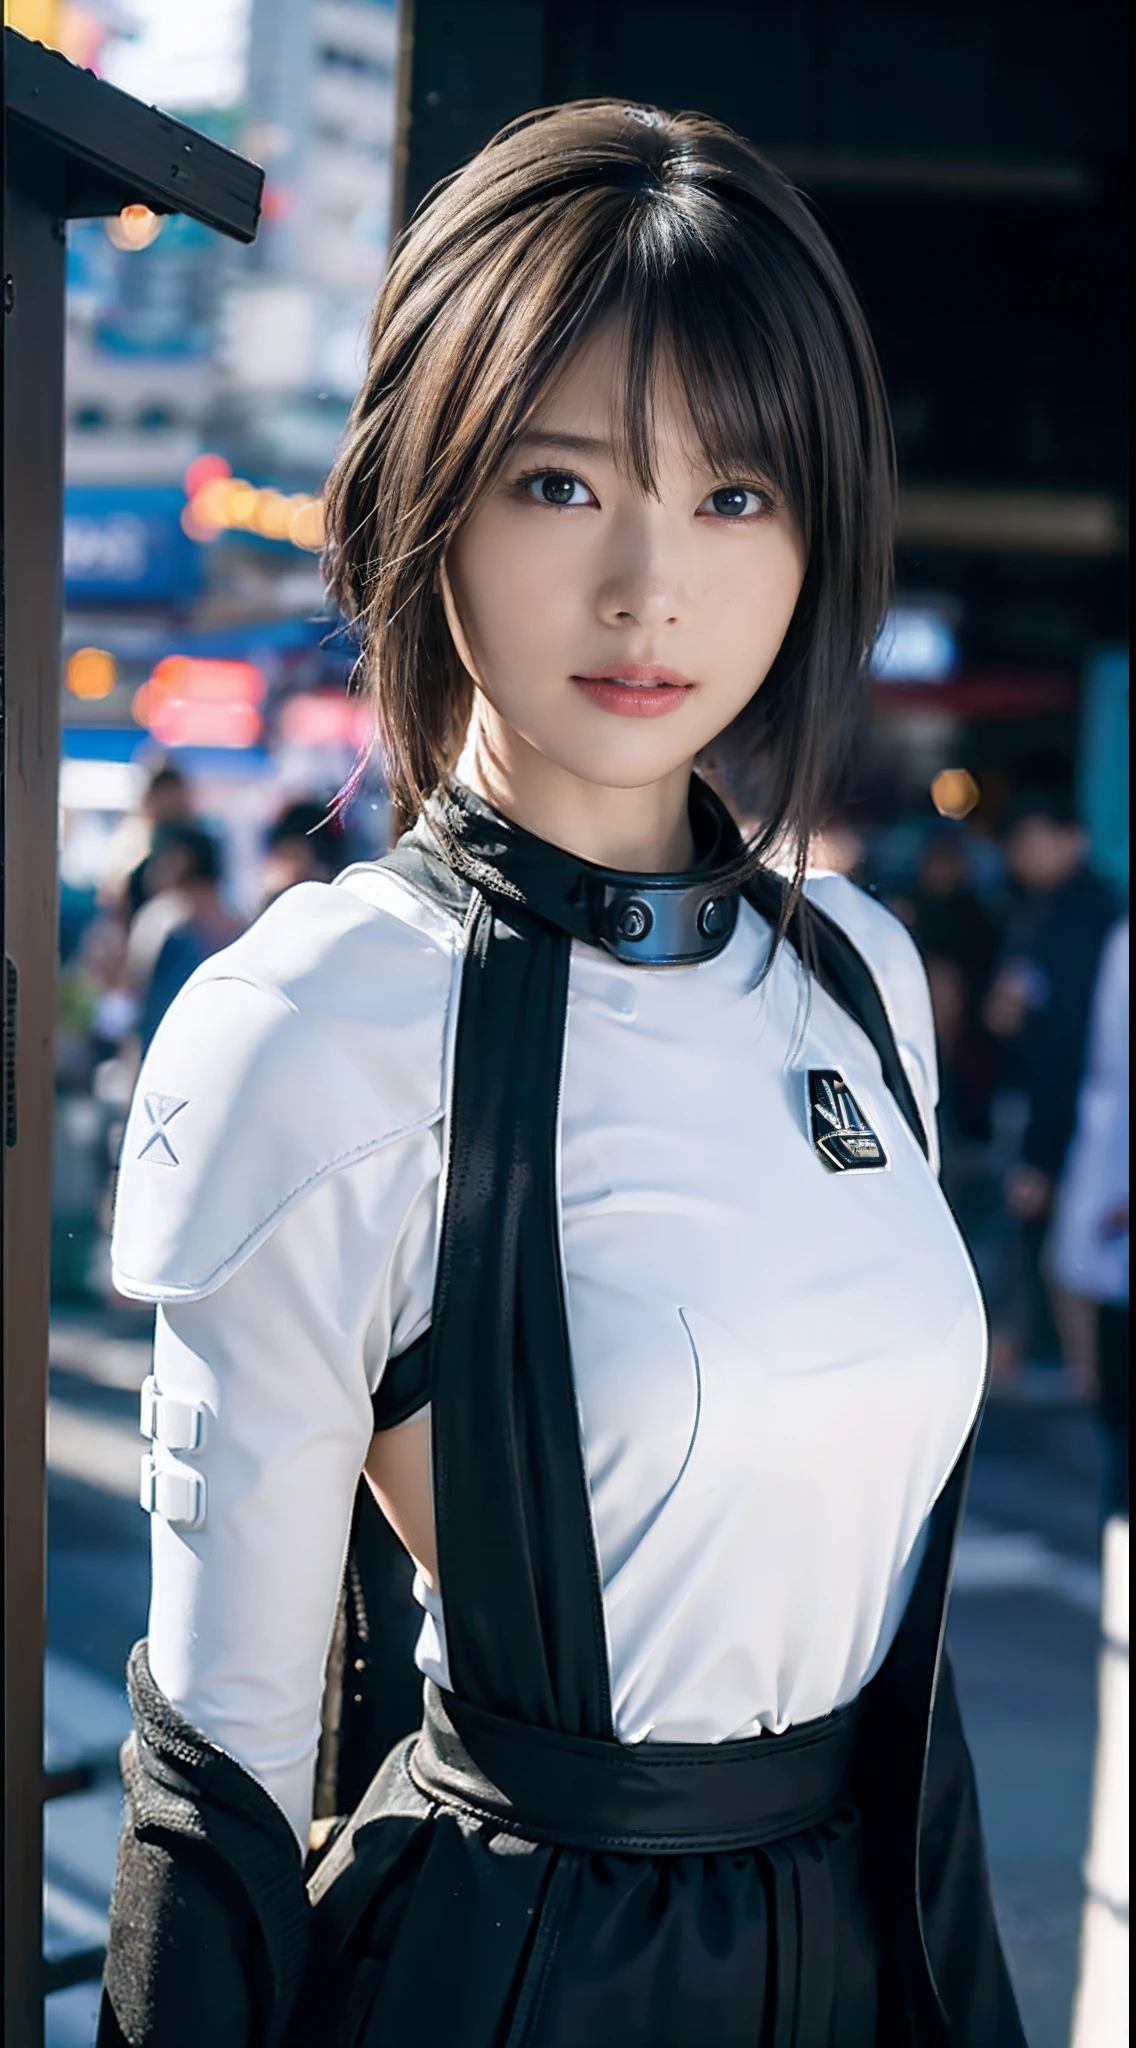 ((top-quality)), ((​masterpiece)), ((realisitic)), (detaileds), (Photorealsitic:1.5), Future Girl, (perfect body type), (White bodysuit), lights on armor, Cybernetic Headwear, Look at viewers, dynamicposes, postapocalyptic, destroyed city background, building in fire, scientific fiction, nffsw, Ray traching, NVIDIA RTX, Hyper-Resolution, Unreal 5, Sub-surface scattering, PBR Texturing, post processed, Anisotropy Filtering, depth of fields, Maximum clarity and sharpness, thirds rule、8K Raw、(Luminescent particles:1.4)、(extremely details CG、Unity 8k Wallpapers、。.。.。.。.。.3D、lighting like a movie、lensflare)、Reflectors、foco nítido、Cyberpunk Art、Cyberpunk architecture、